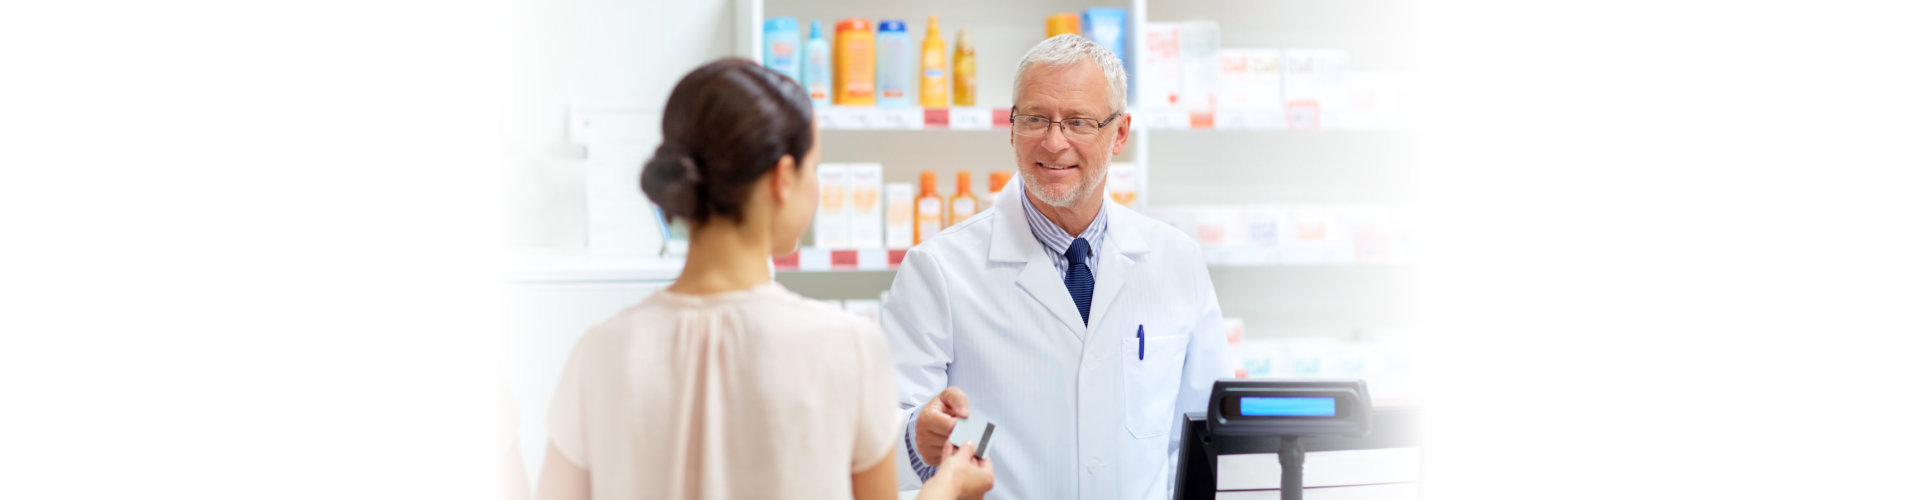 young woman talking to an elderly pharmacist